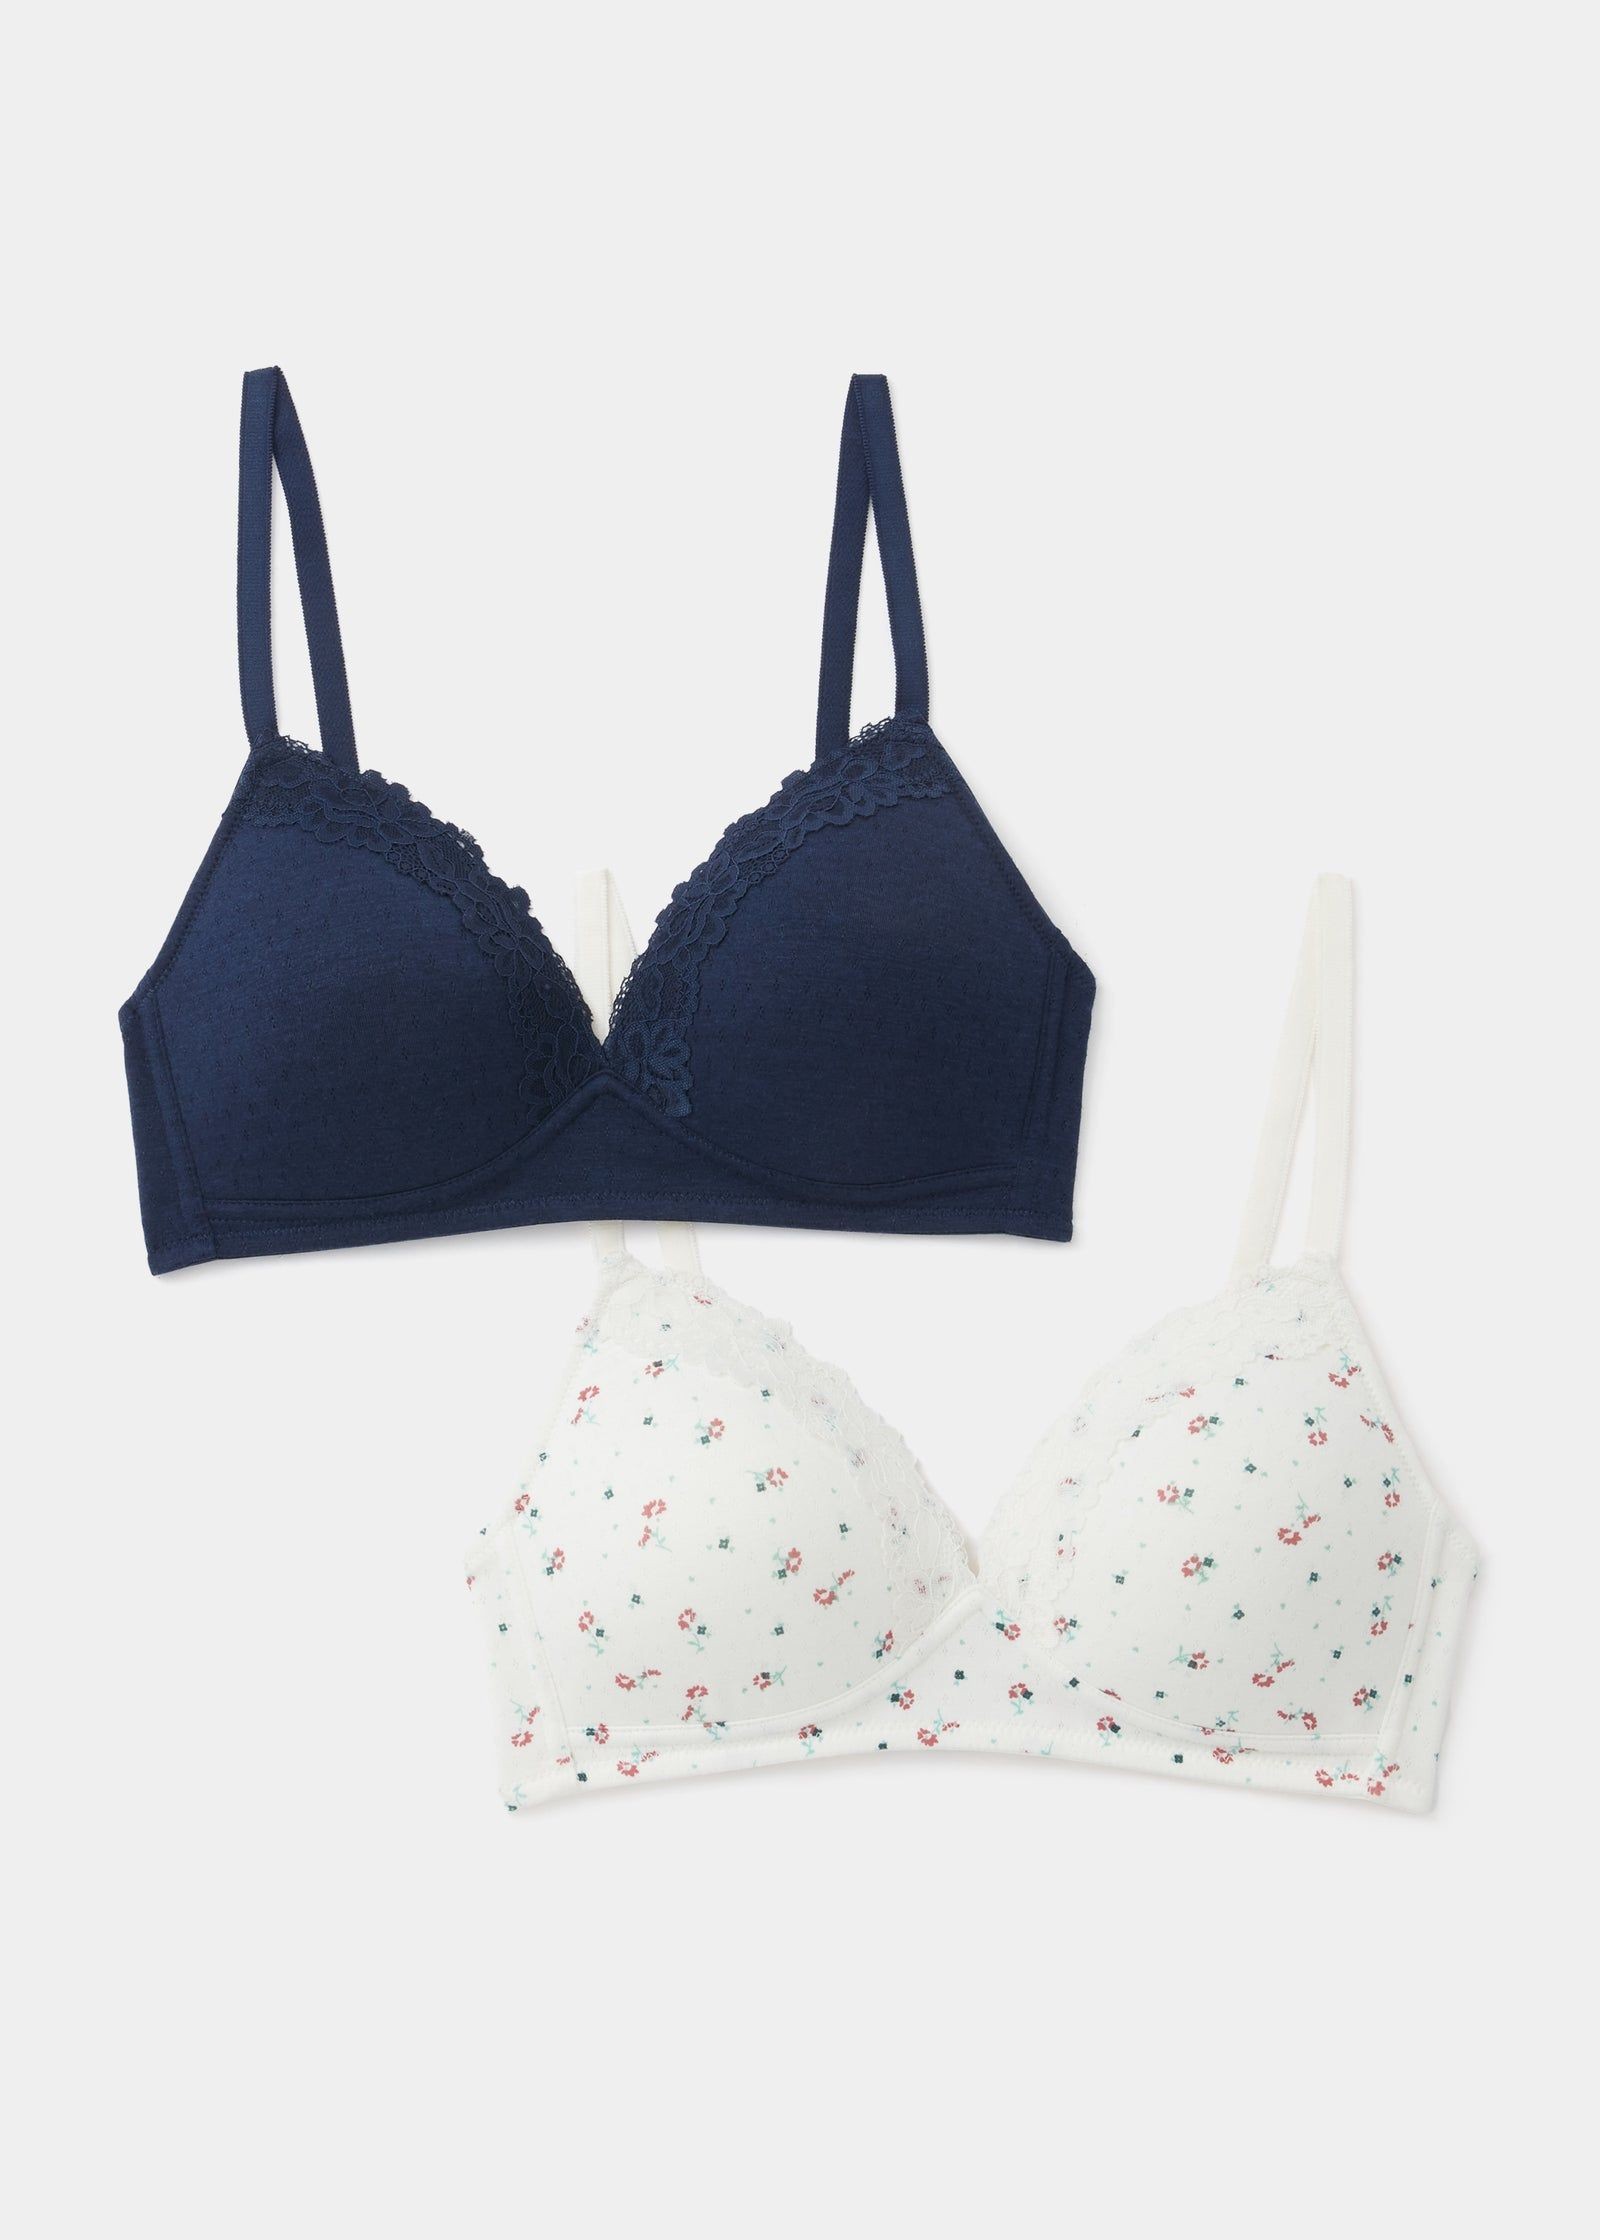 Buy Womens Bras at Lowest Price in Bahrain - bfab